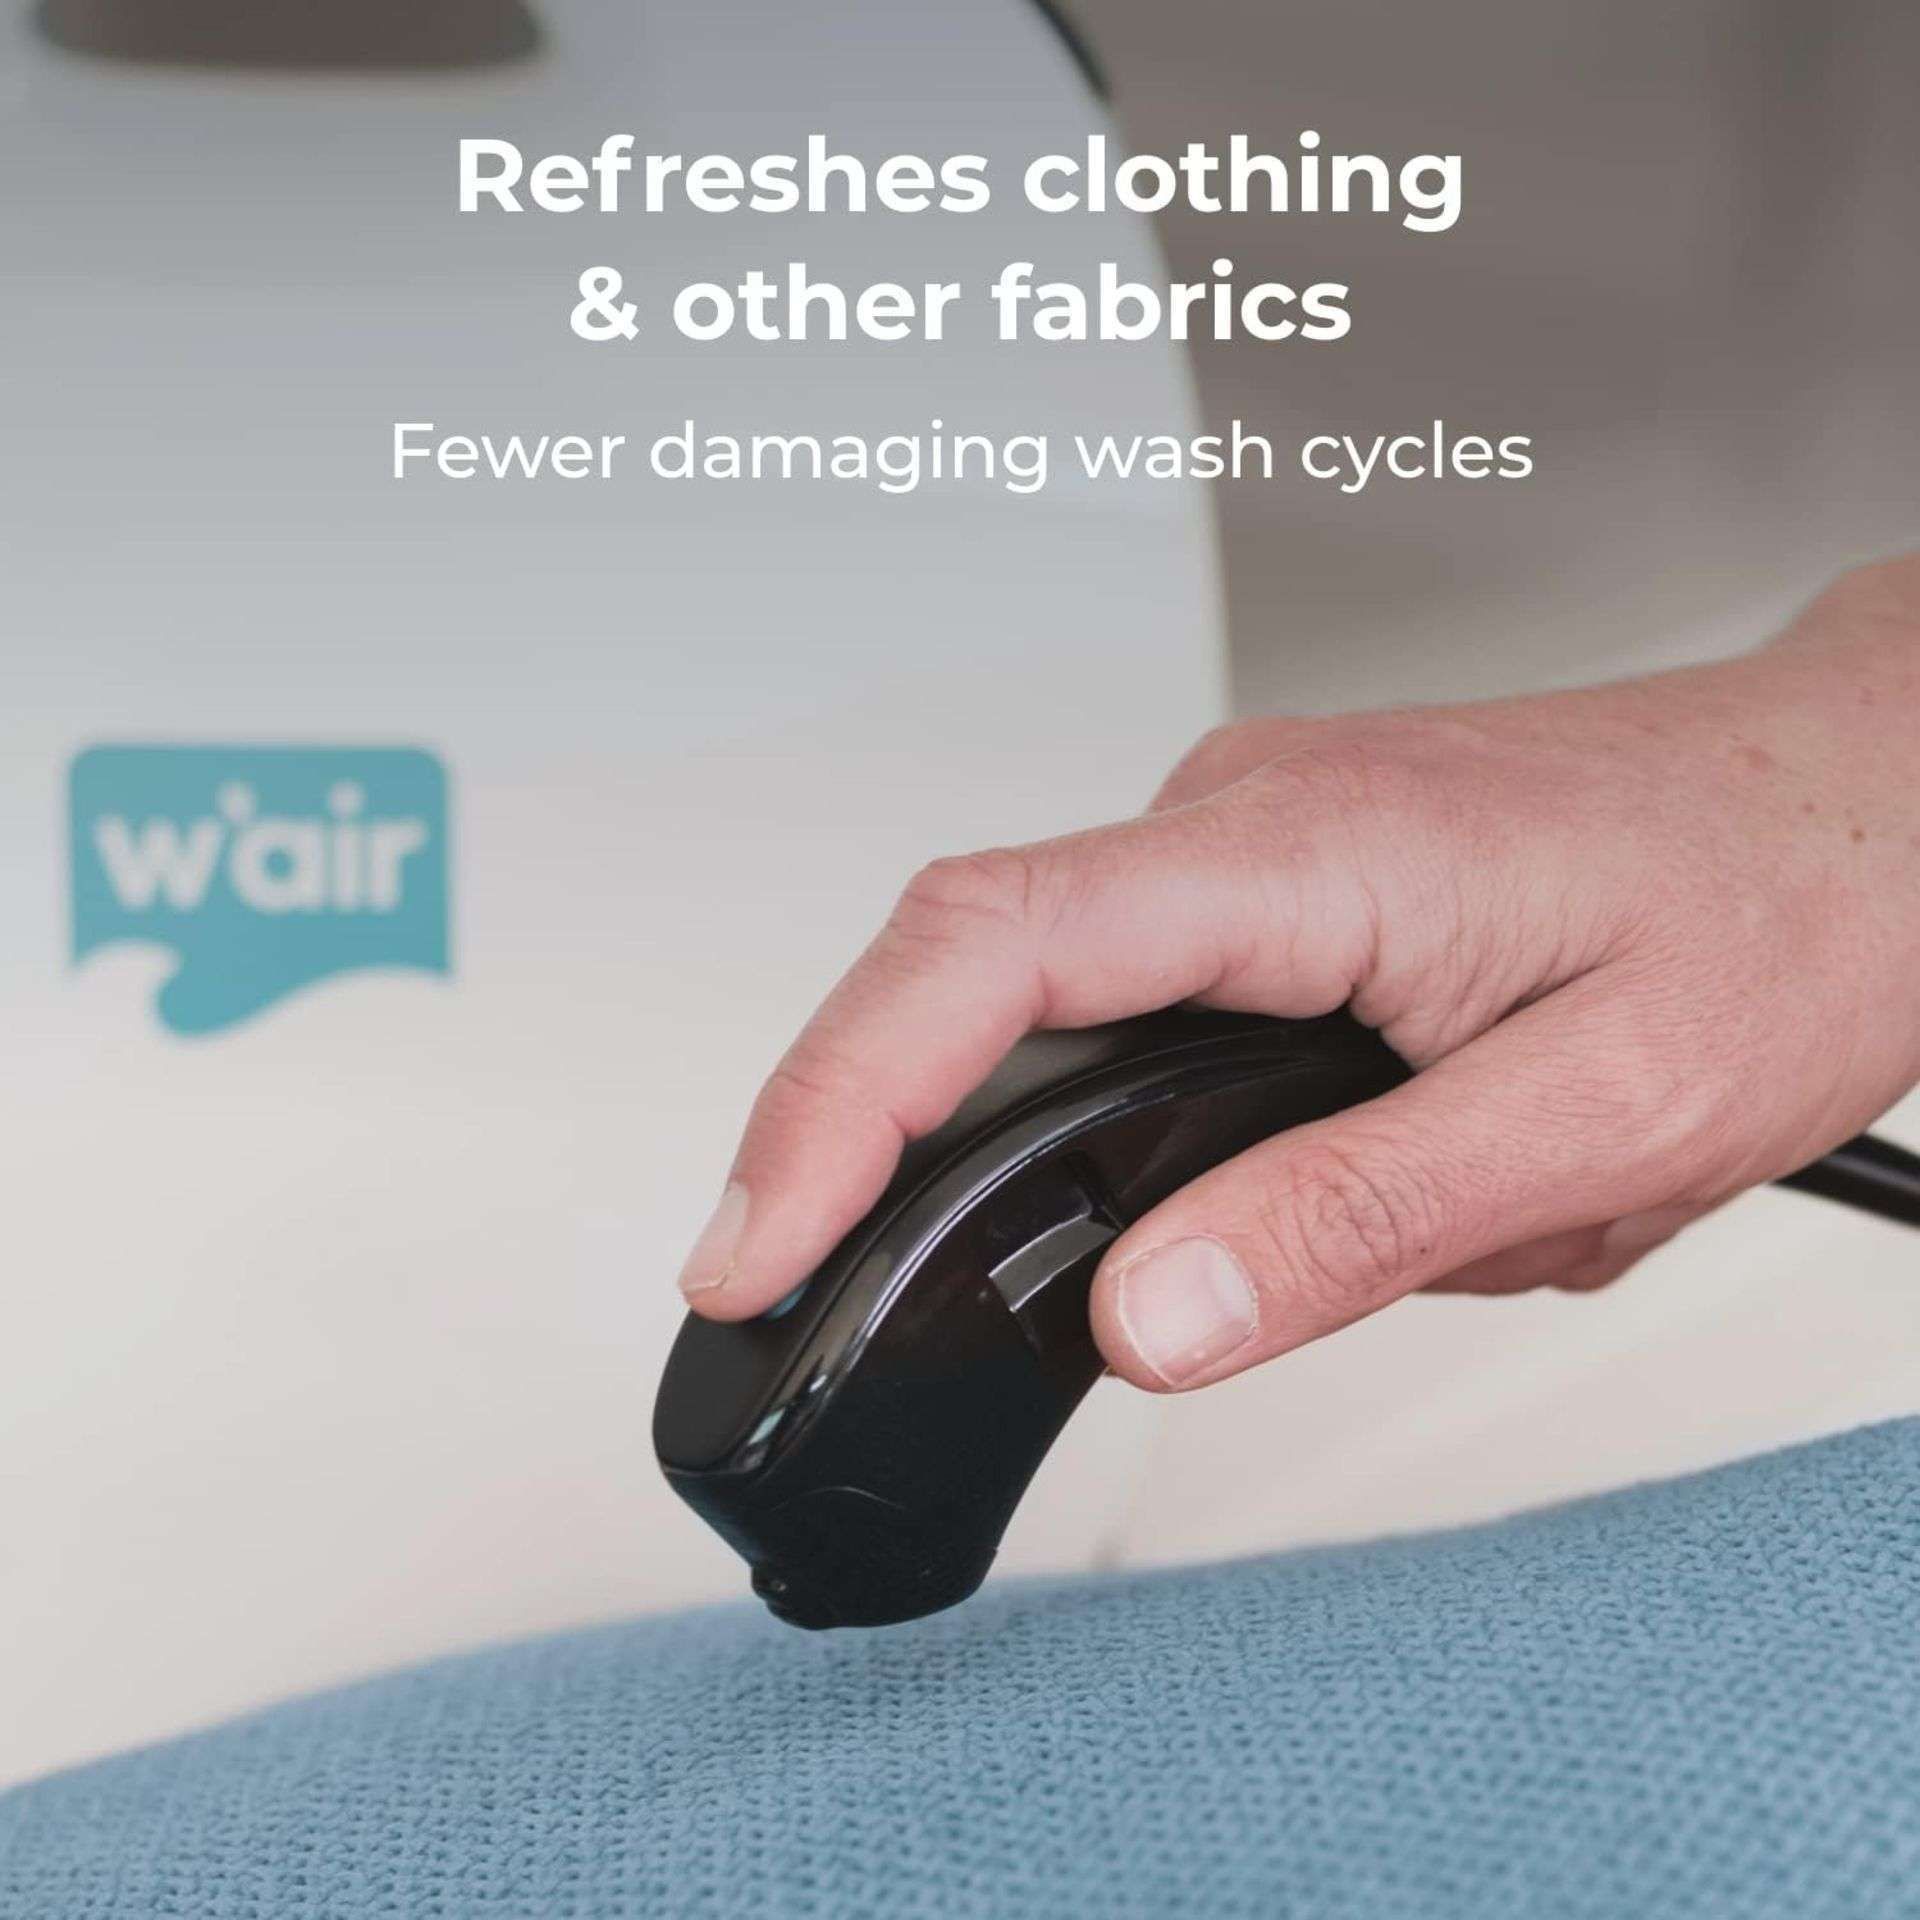 10 X BRAND NEW W'AIR SNEAKER CLEANING SYSTEMS RRP £299, The w'air uses hydrodynamic technology - Bild 4 aus 6